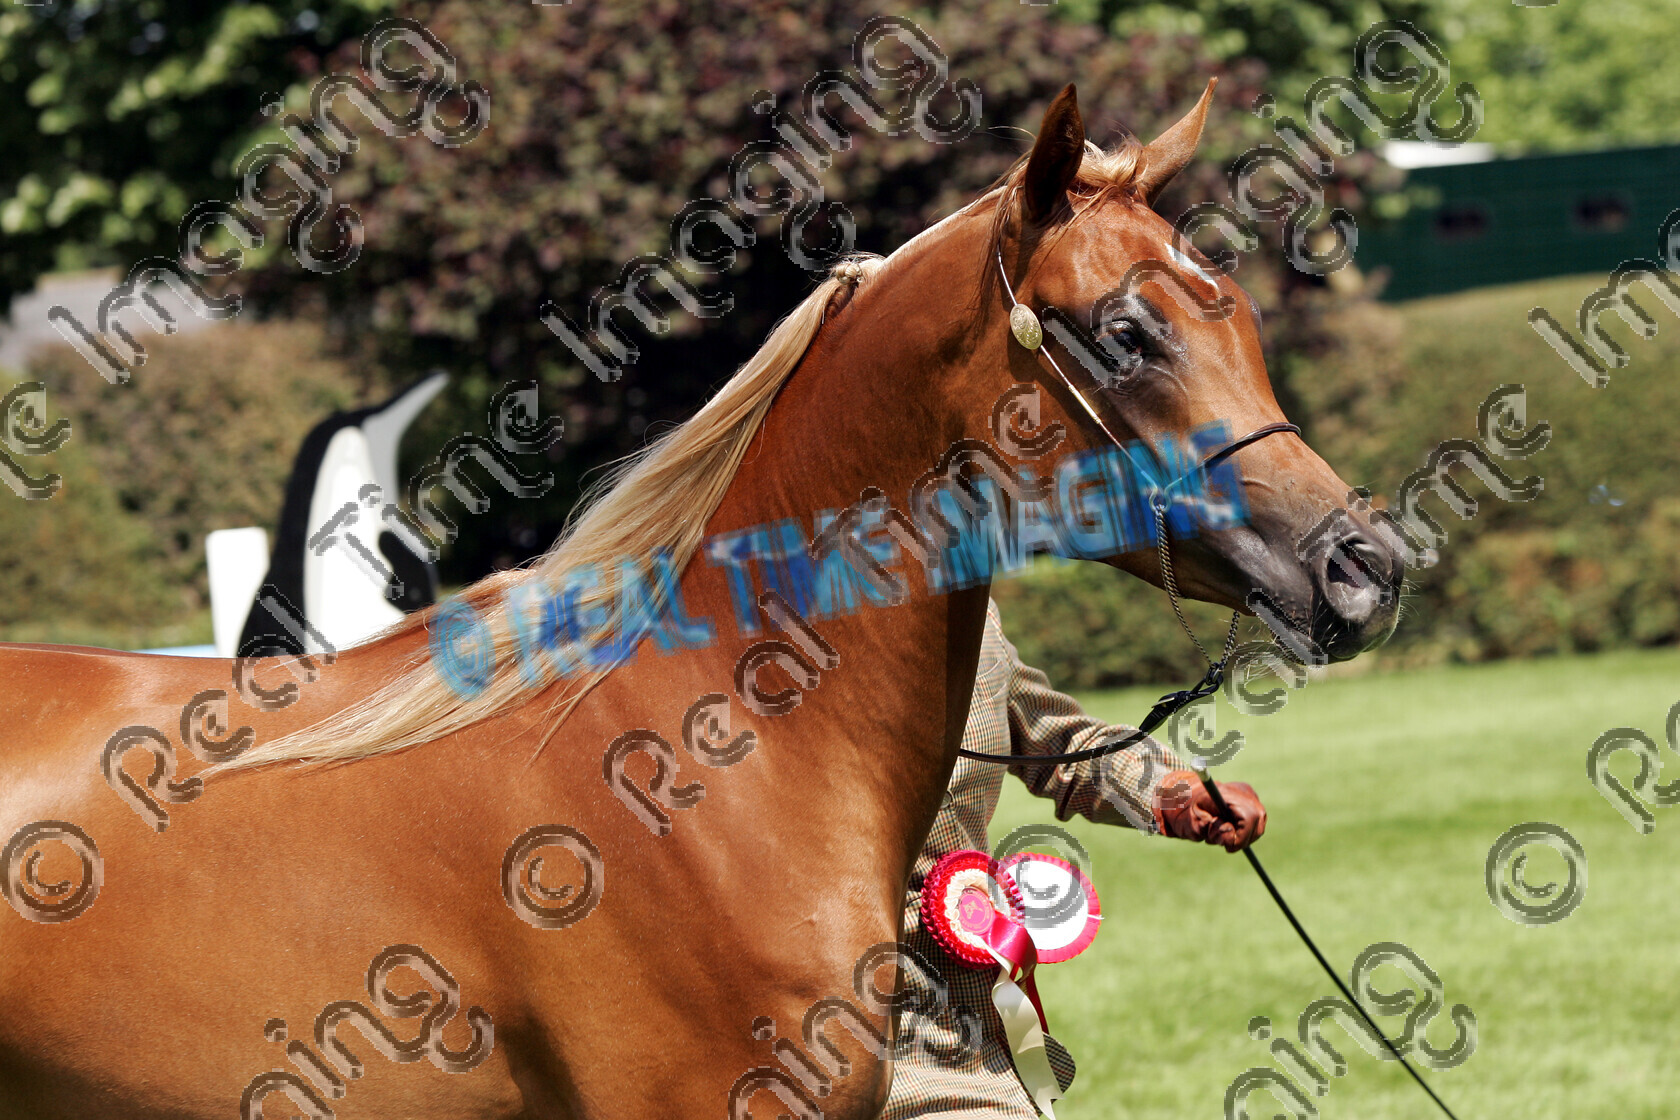 S06-28-3-139 copy 
 Keywords: The Royal Norfolk Show Wednesday 28 2006
pure bred arab in hand 145 KUBIARA chestnut mare
rosette rosettes prize winner champion championship first best trot trotting action moving flat close up head shot horse pony showing June